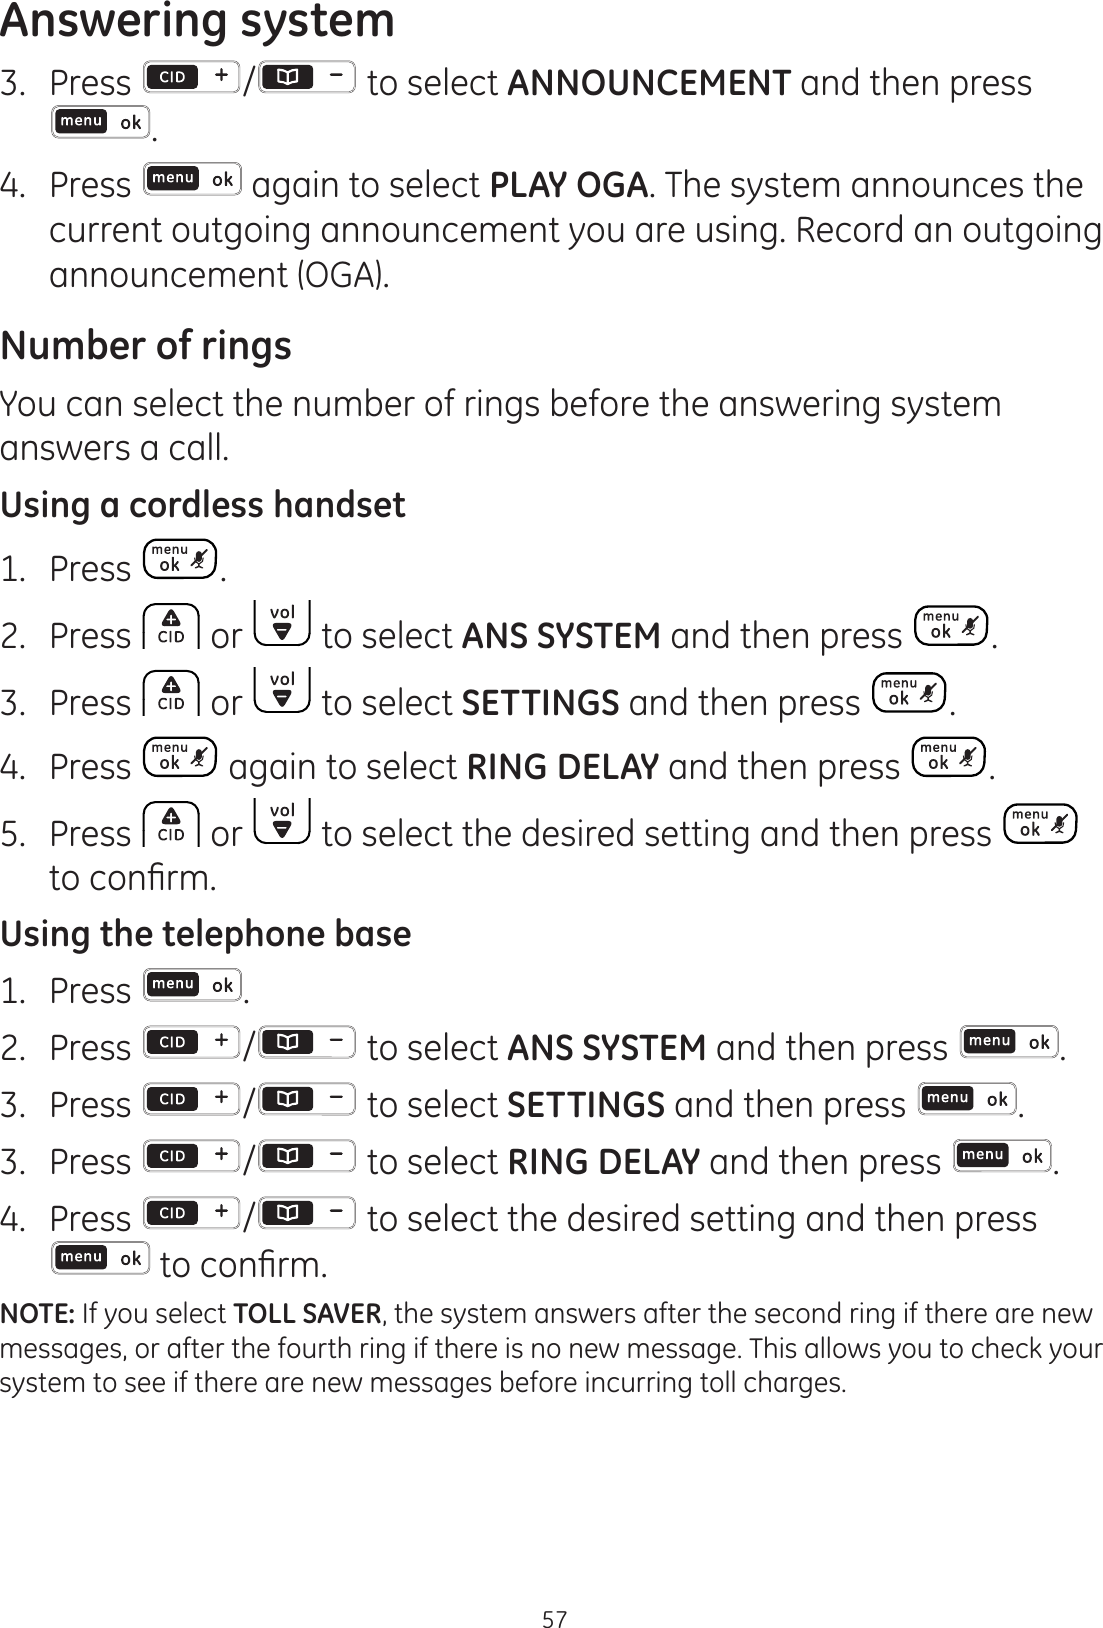 Answering system573.  Press  / to select ANNOUNCEMENT and then press .4.  Press   again to select PLAY OGA. The system announces the current outgoing announcement you are using. Record an outgoing announcement (OGA).Number of ringsYou can select the number of rings before the answering system answers a call.Using a cordless handset1.  Press  .2.  Press   or   to select ANS SYSTEM and then press  . 3.  Press   or   to select SETTINGS and then press  . 4.  Press   again to select RING DELAY and then press  .5.  Press   or   to select the desired setting and then press   WRFRQ¿UPUsing the telephone base1.  Press  .2.  Press  /  to select ANS SYSTEM and then press  . 3.  Press  /  to select SETTINGS and then press  . 3.  Press  /  to select RING DELAY and then press  .4.  Press  /  to select the desired setting and then press WRFRQ¿UPNOTE: If you select TOLL SAVER, the system answers after the second ring if there are new messages, or after the fourth ring if there is no new message. This allows you to check your system to see if there are new messages before incurring toll charges.